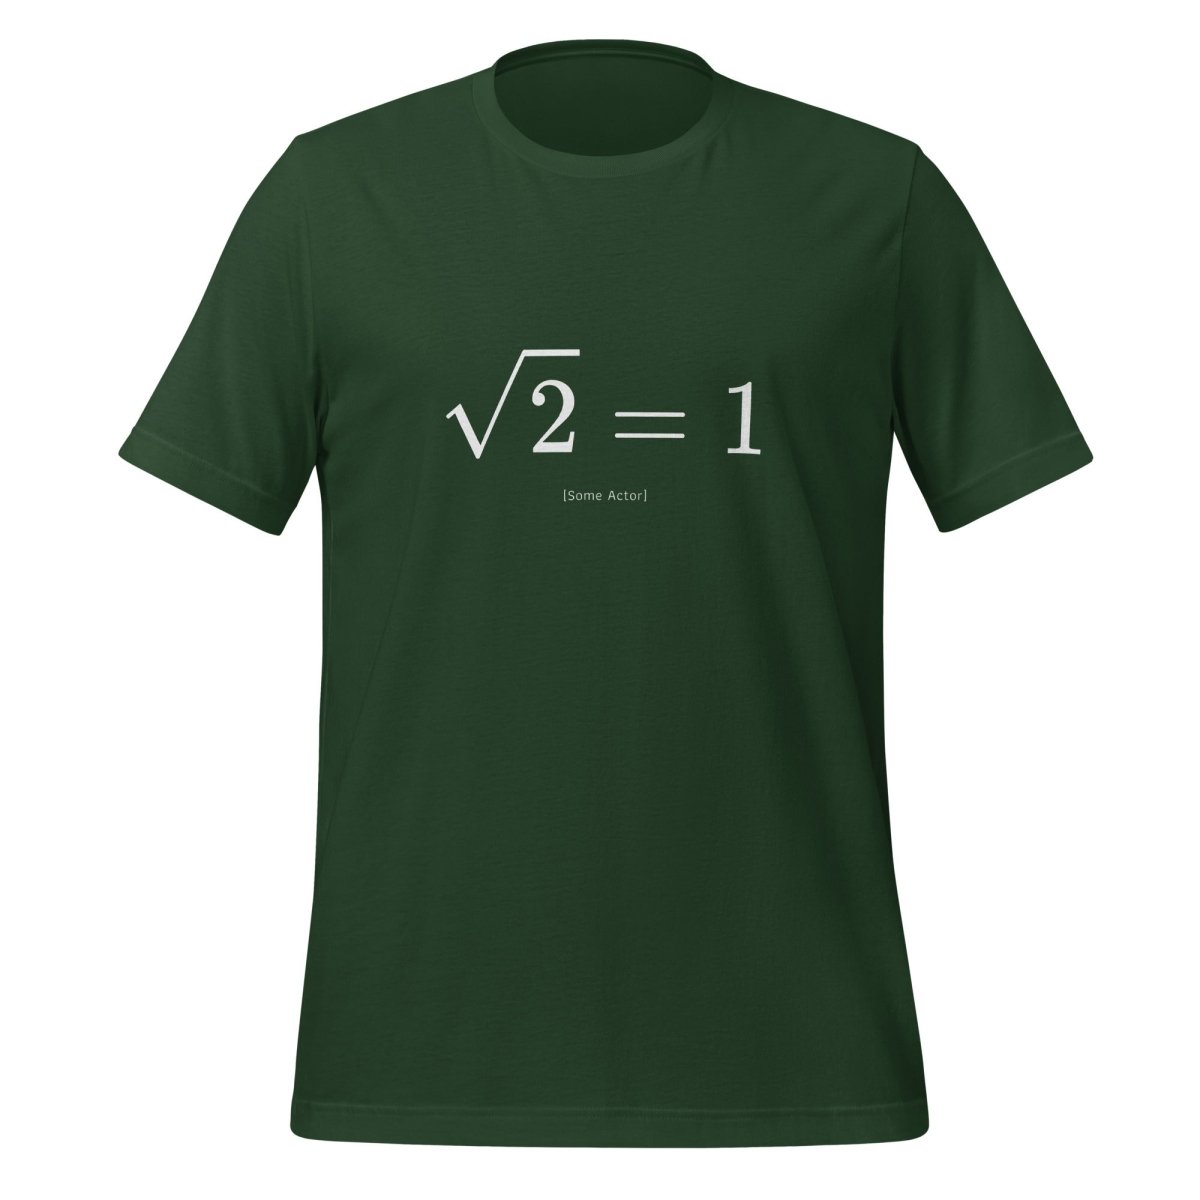 The Square Root of 2 Equals 1 T - Shirt (unisex) - Forest - AI Store